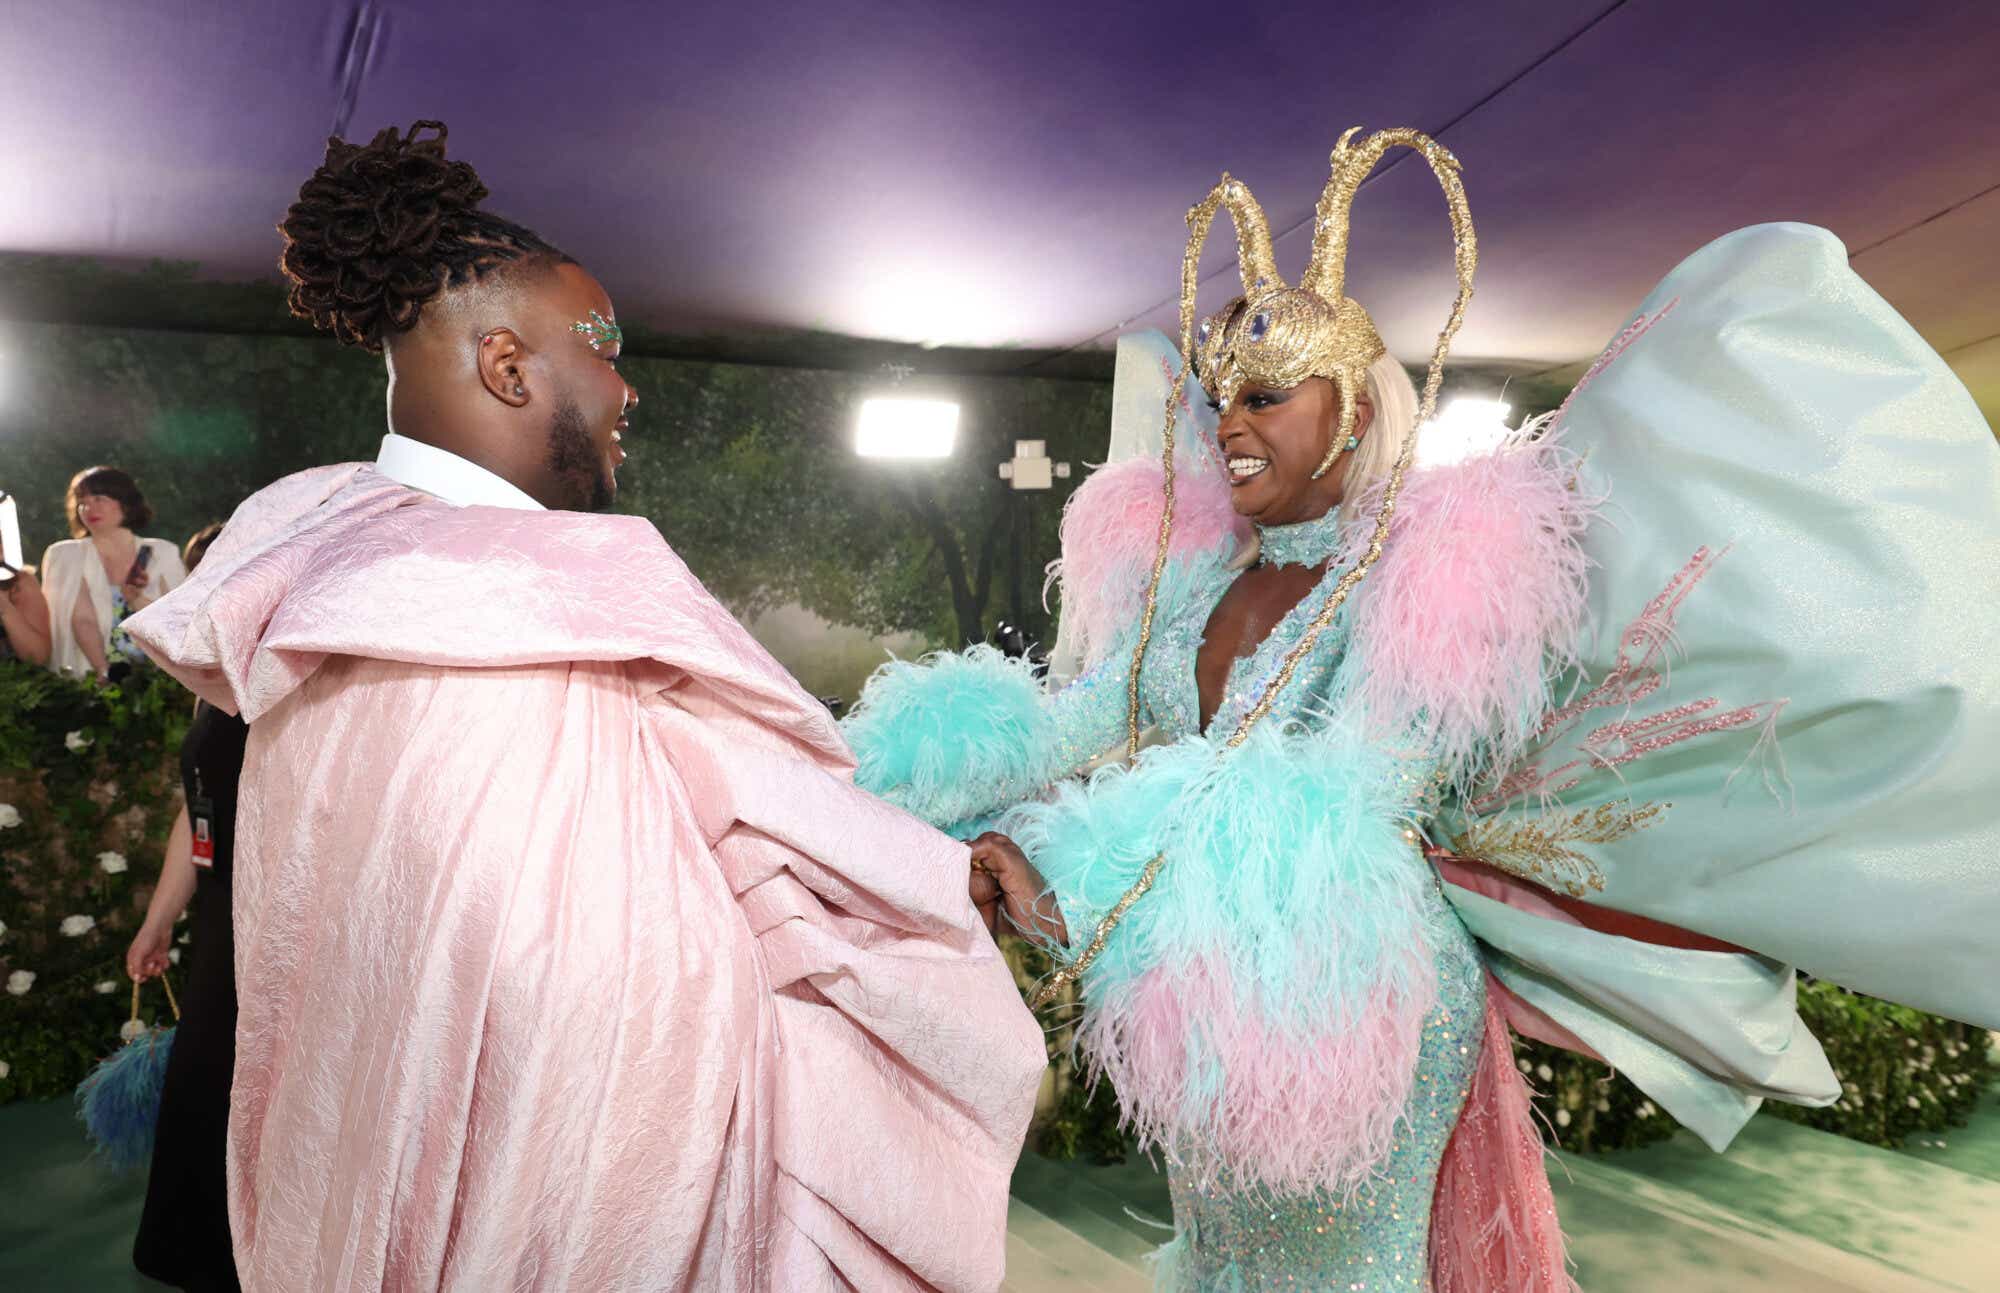 Kyle Ramar Freeman wears a pale pink cape with a large collar and bedazzled eyebrows, and J. Harrison Ghee wears a turquoise and pink dress with diamante detail and a Maleficent-style gold headdress